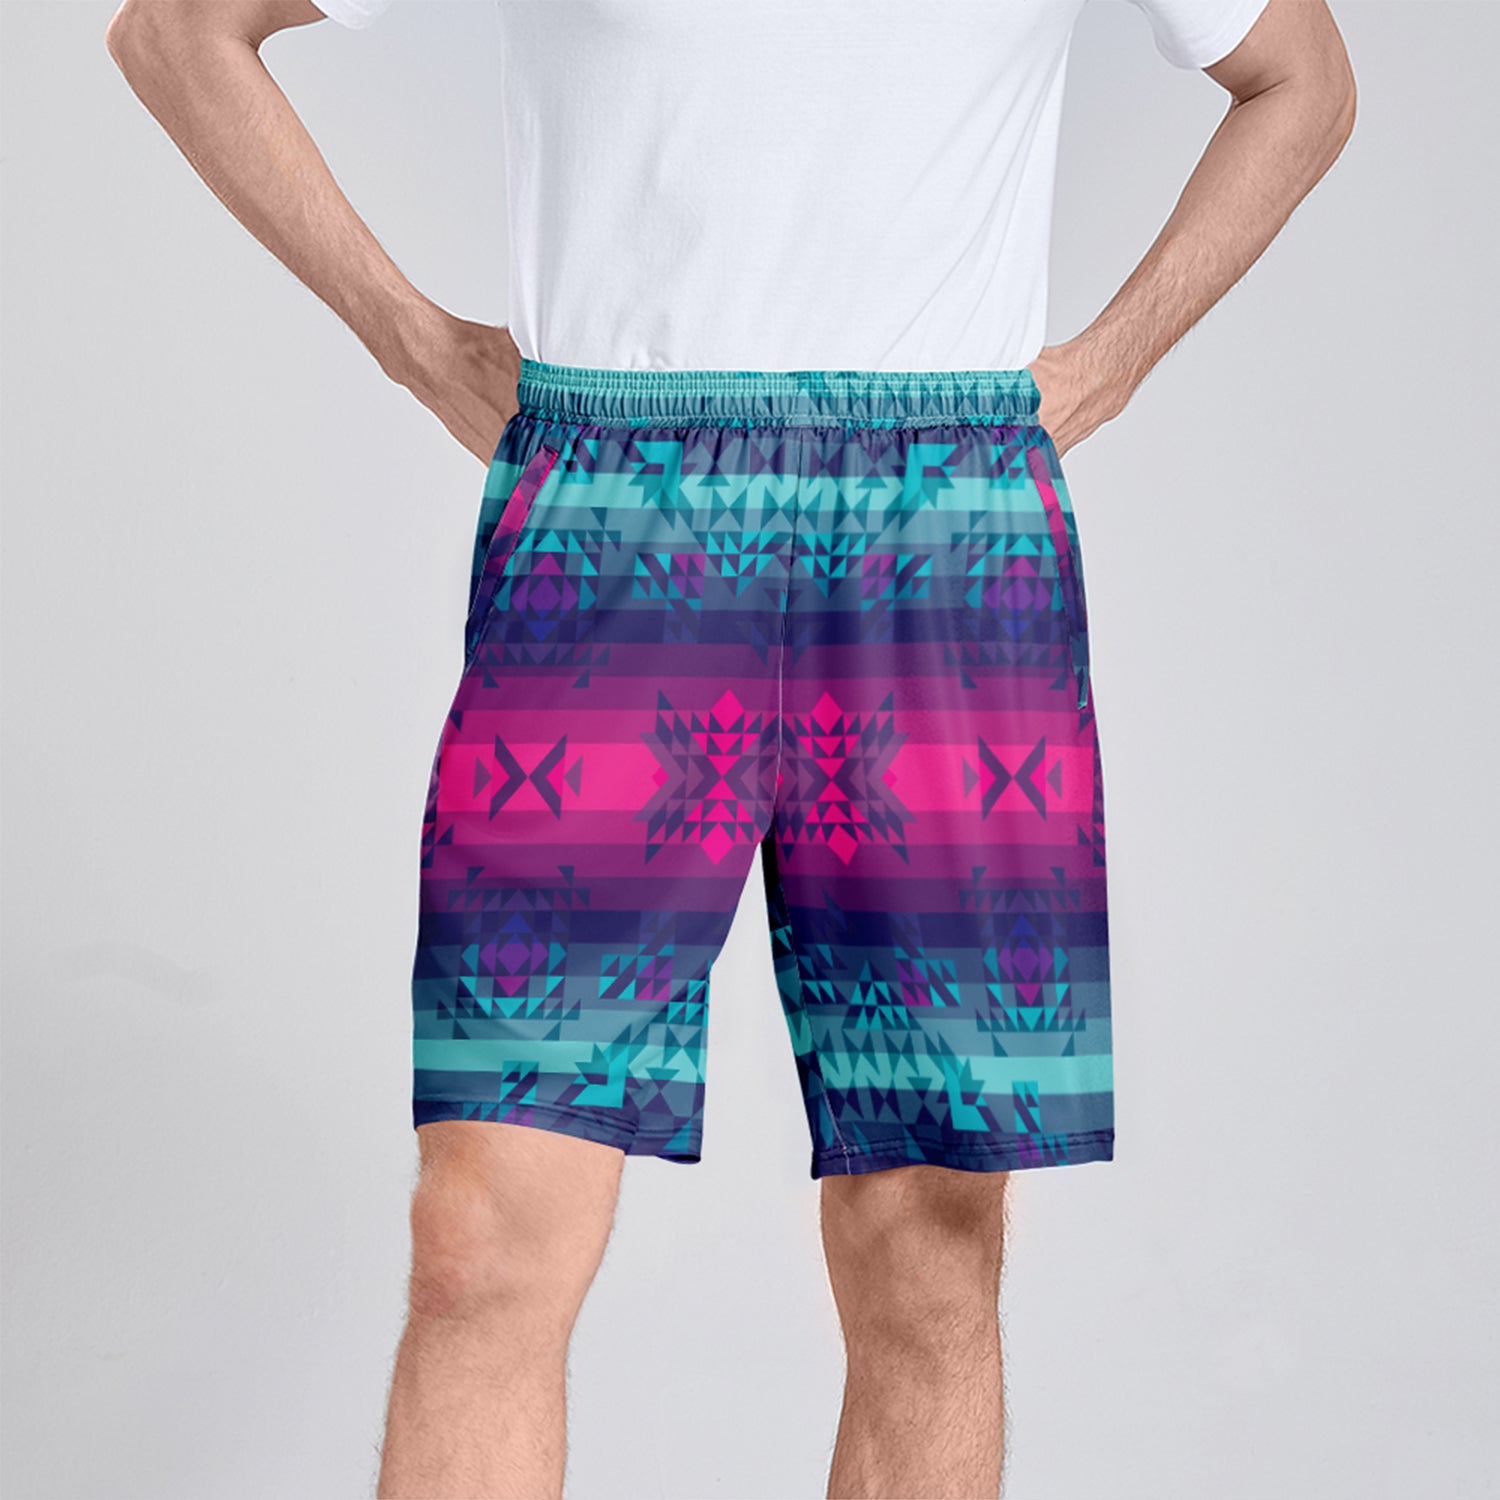 Dimensional Brightburn Athletic Shorts with Pockets